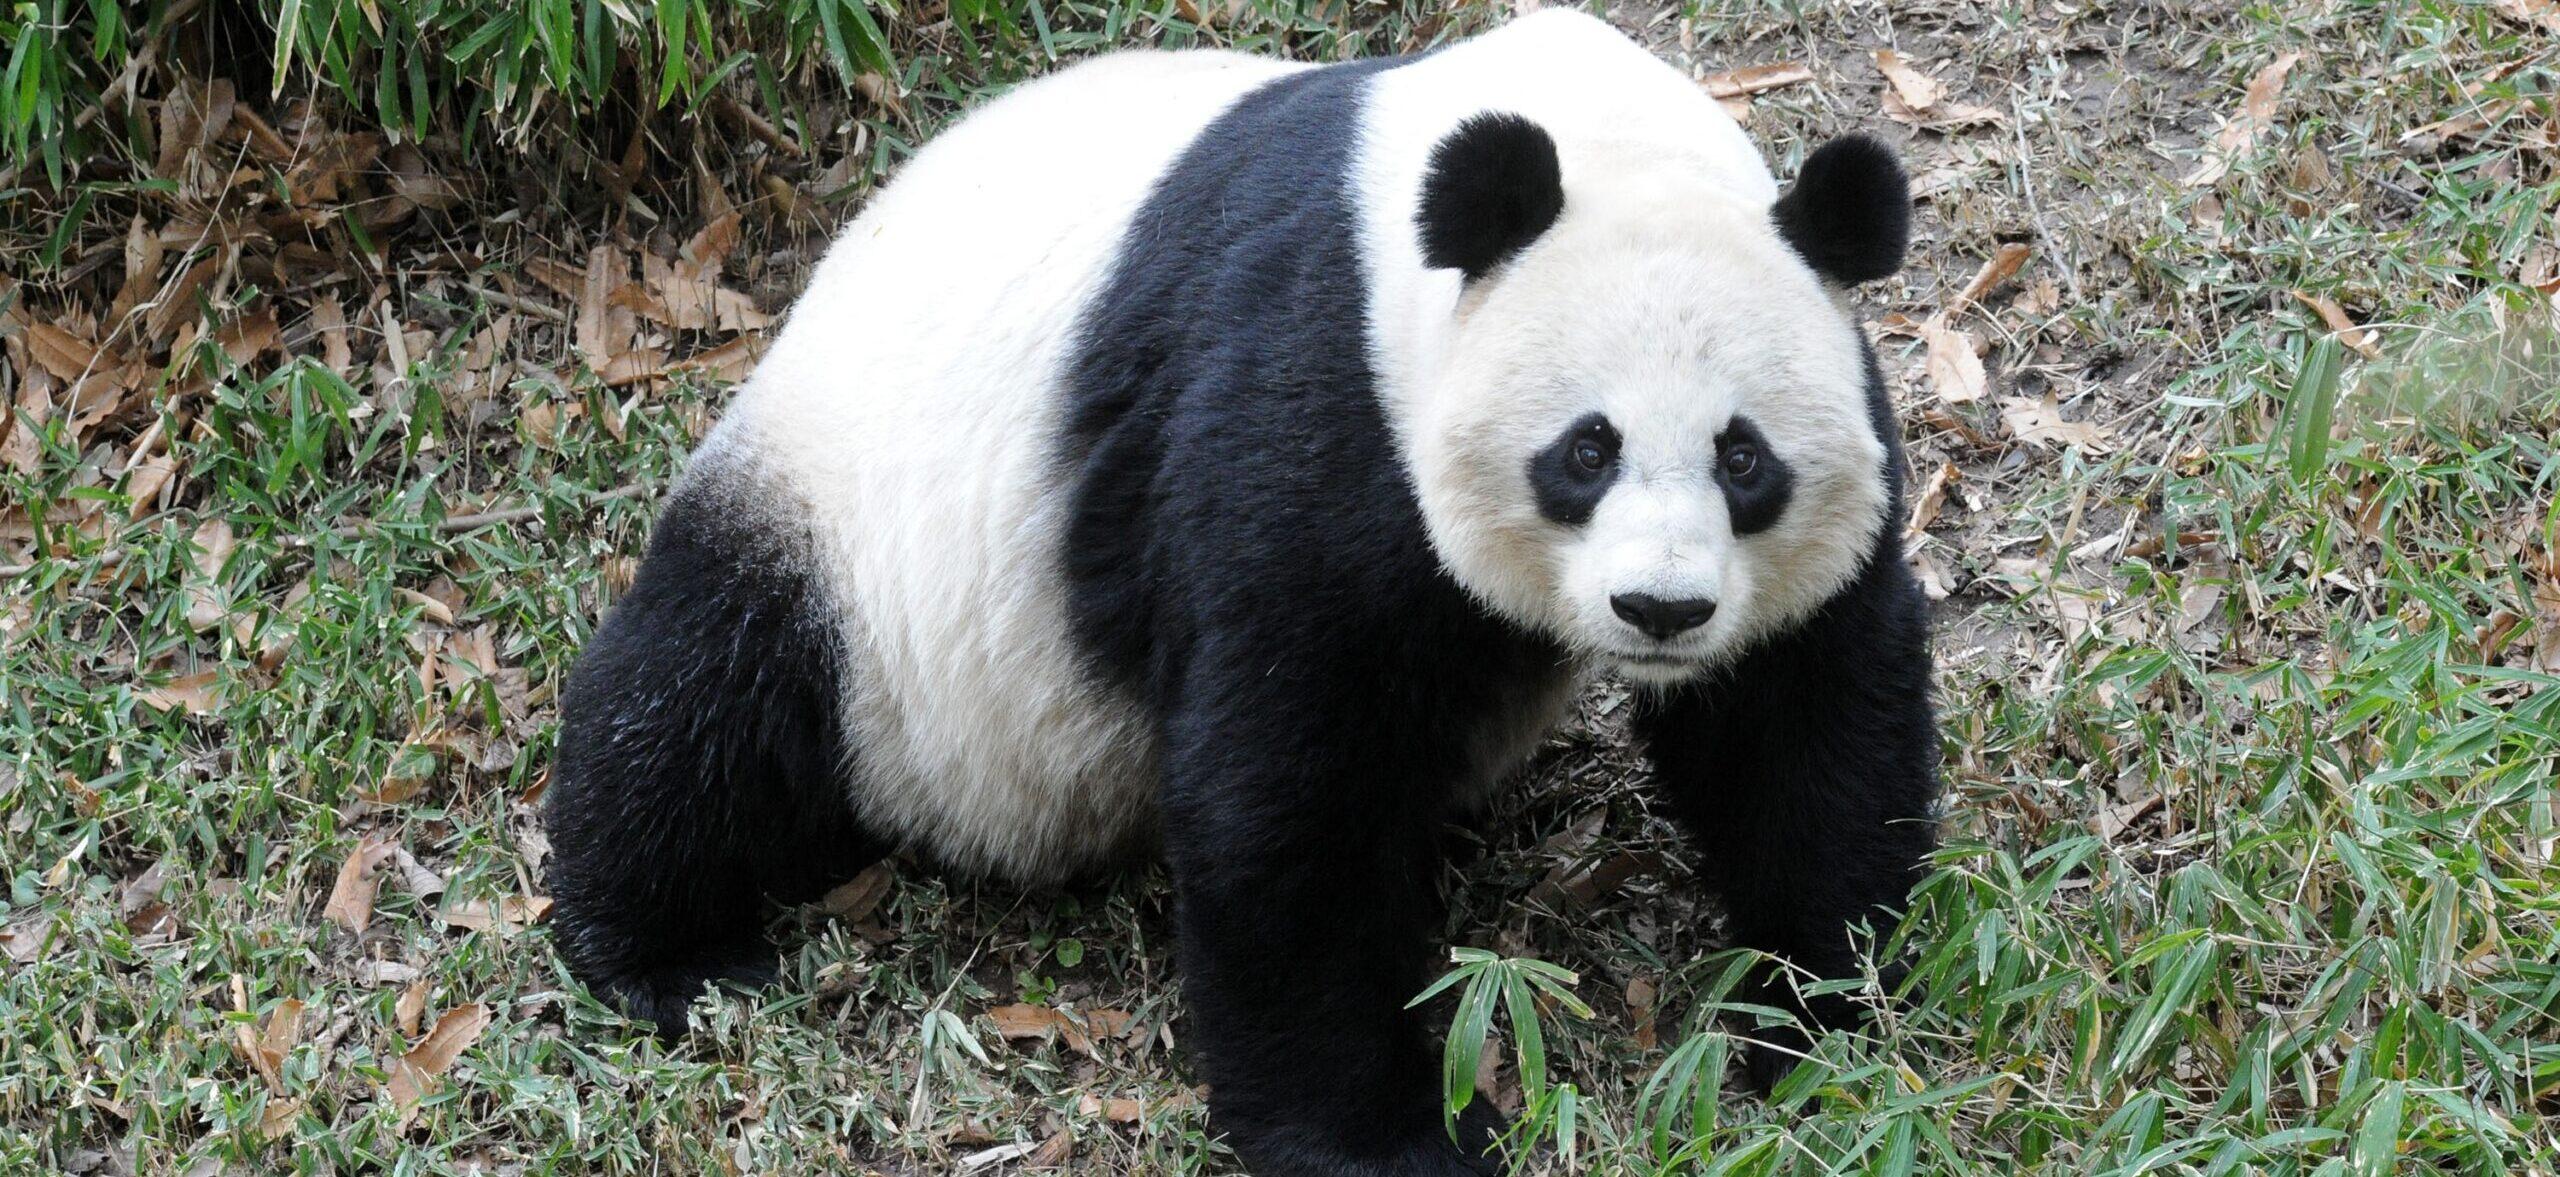 D.C. National Zoo Has ZERO Pandas For The First Time Since 2000 As Bears Depart For China